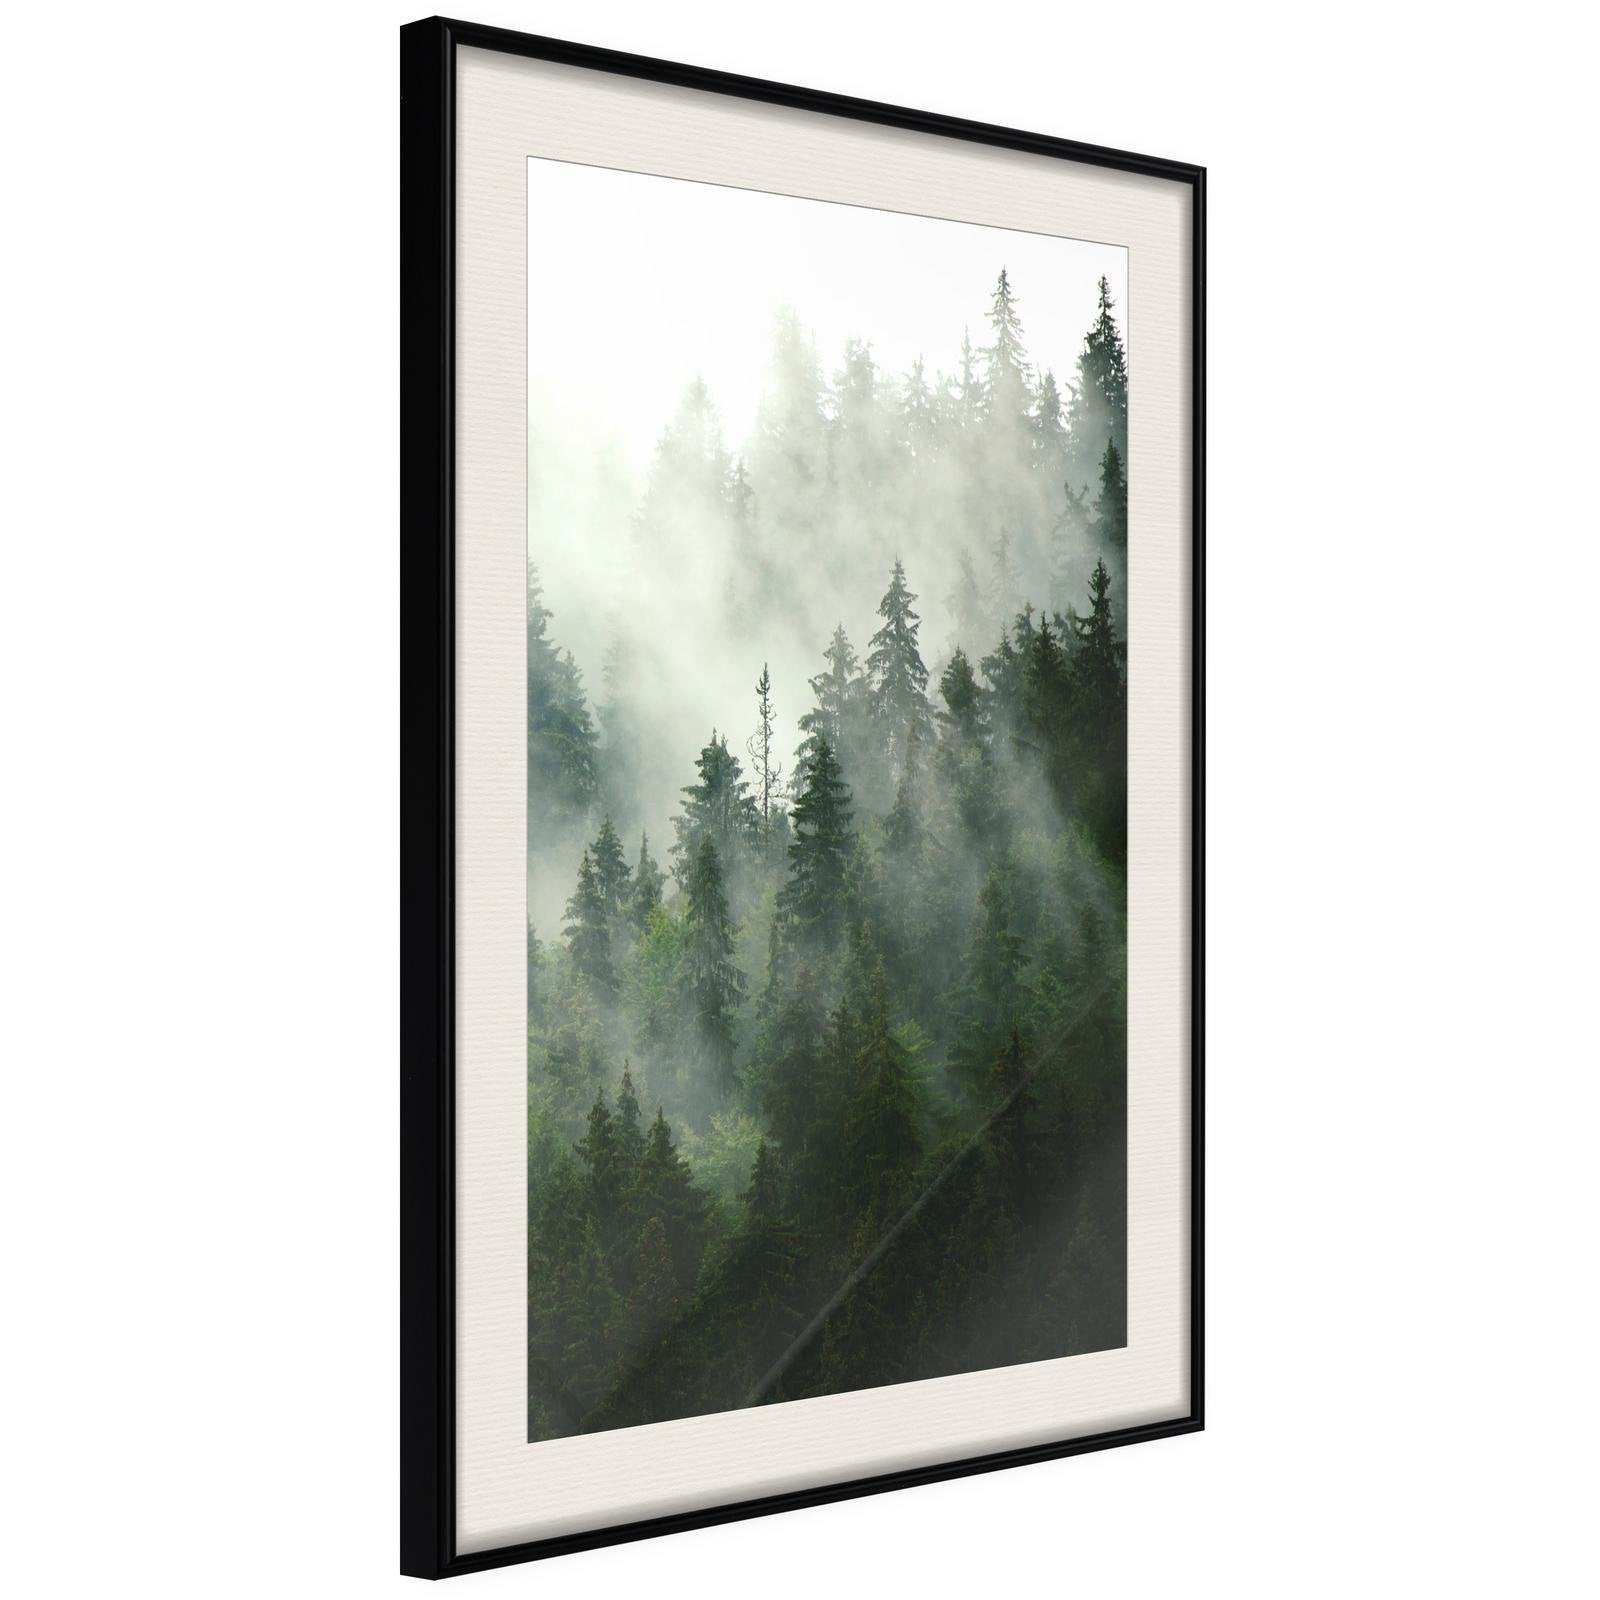 Inramad Poster / Tavla - Steaming Forest-Poster Inramad-Artgeist-20x30-Svart ram med passepartout-peaceofhome.se